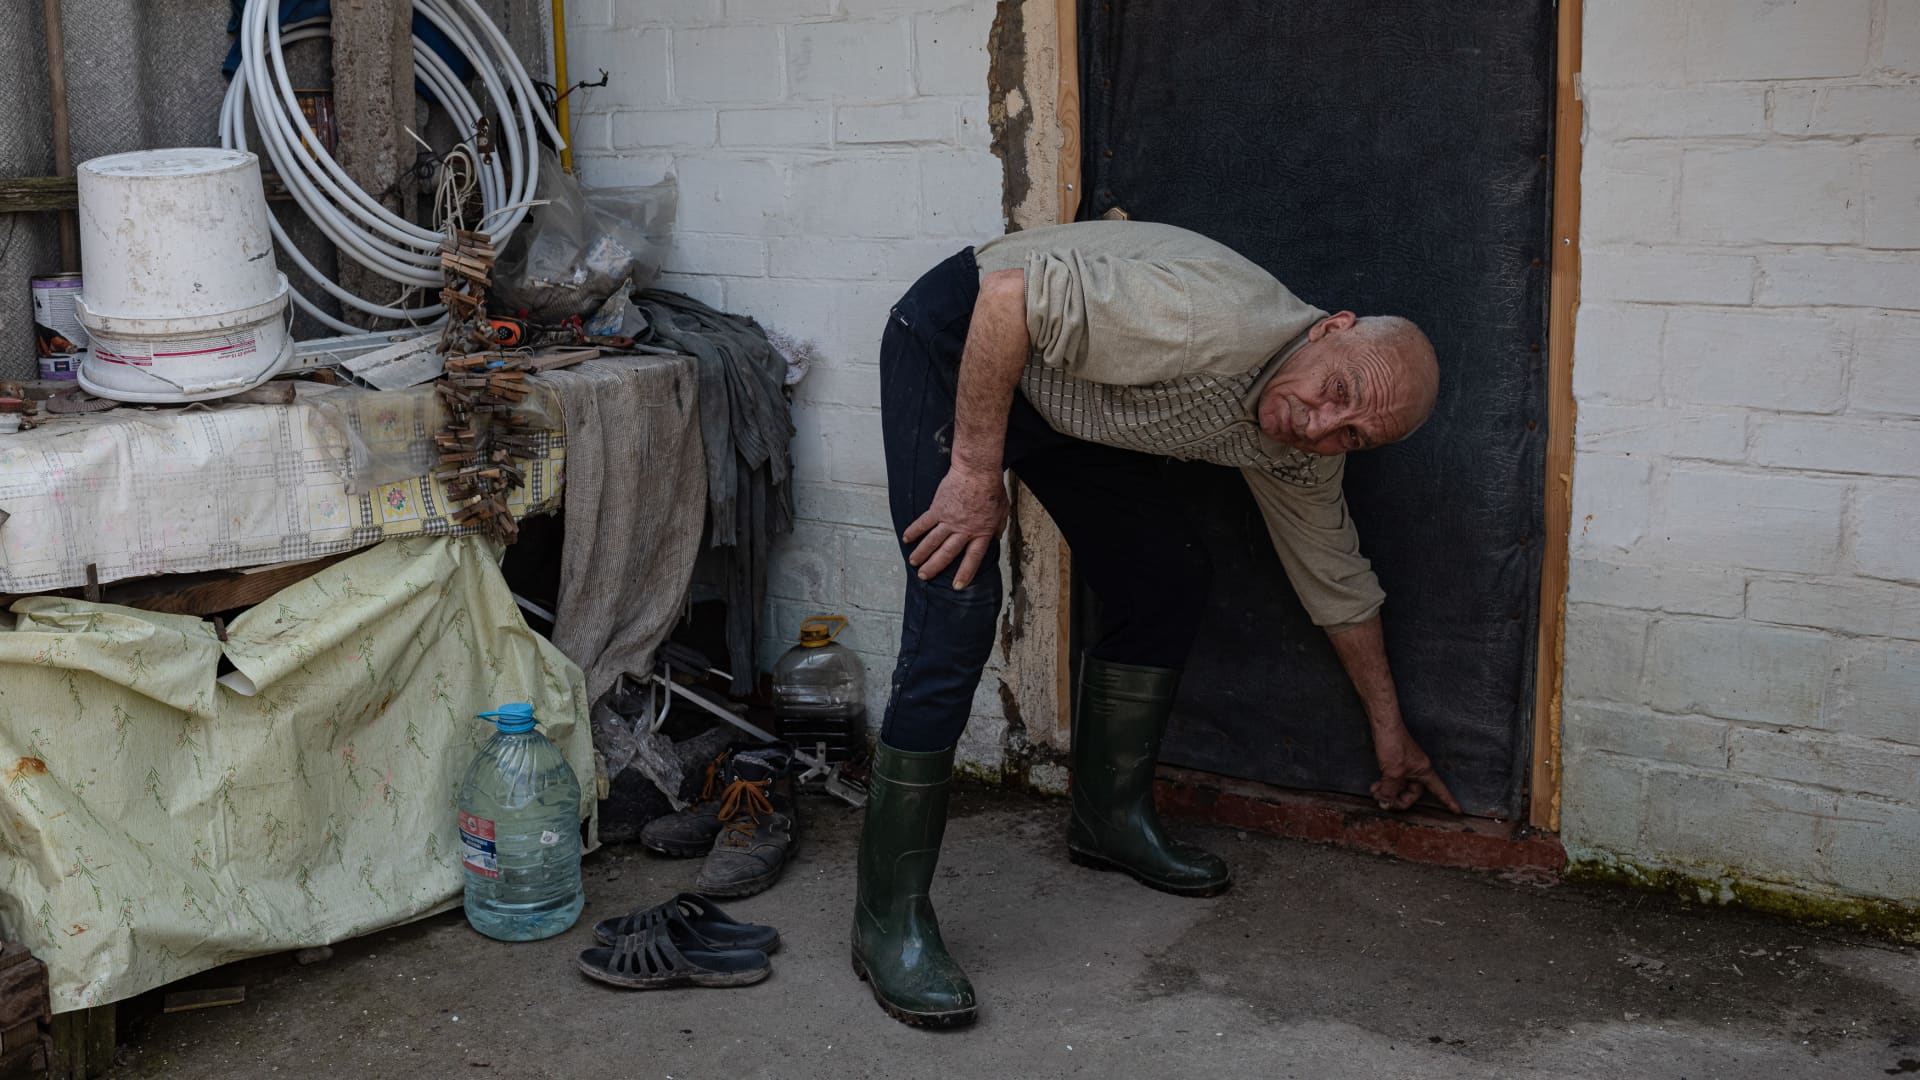 Serhii, 63, shows the initial flooding level in his household, on May 2, 2022 in Demydiv, Ukraine.